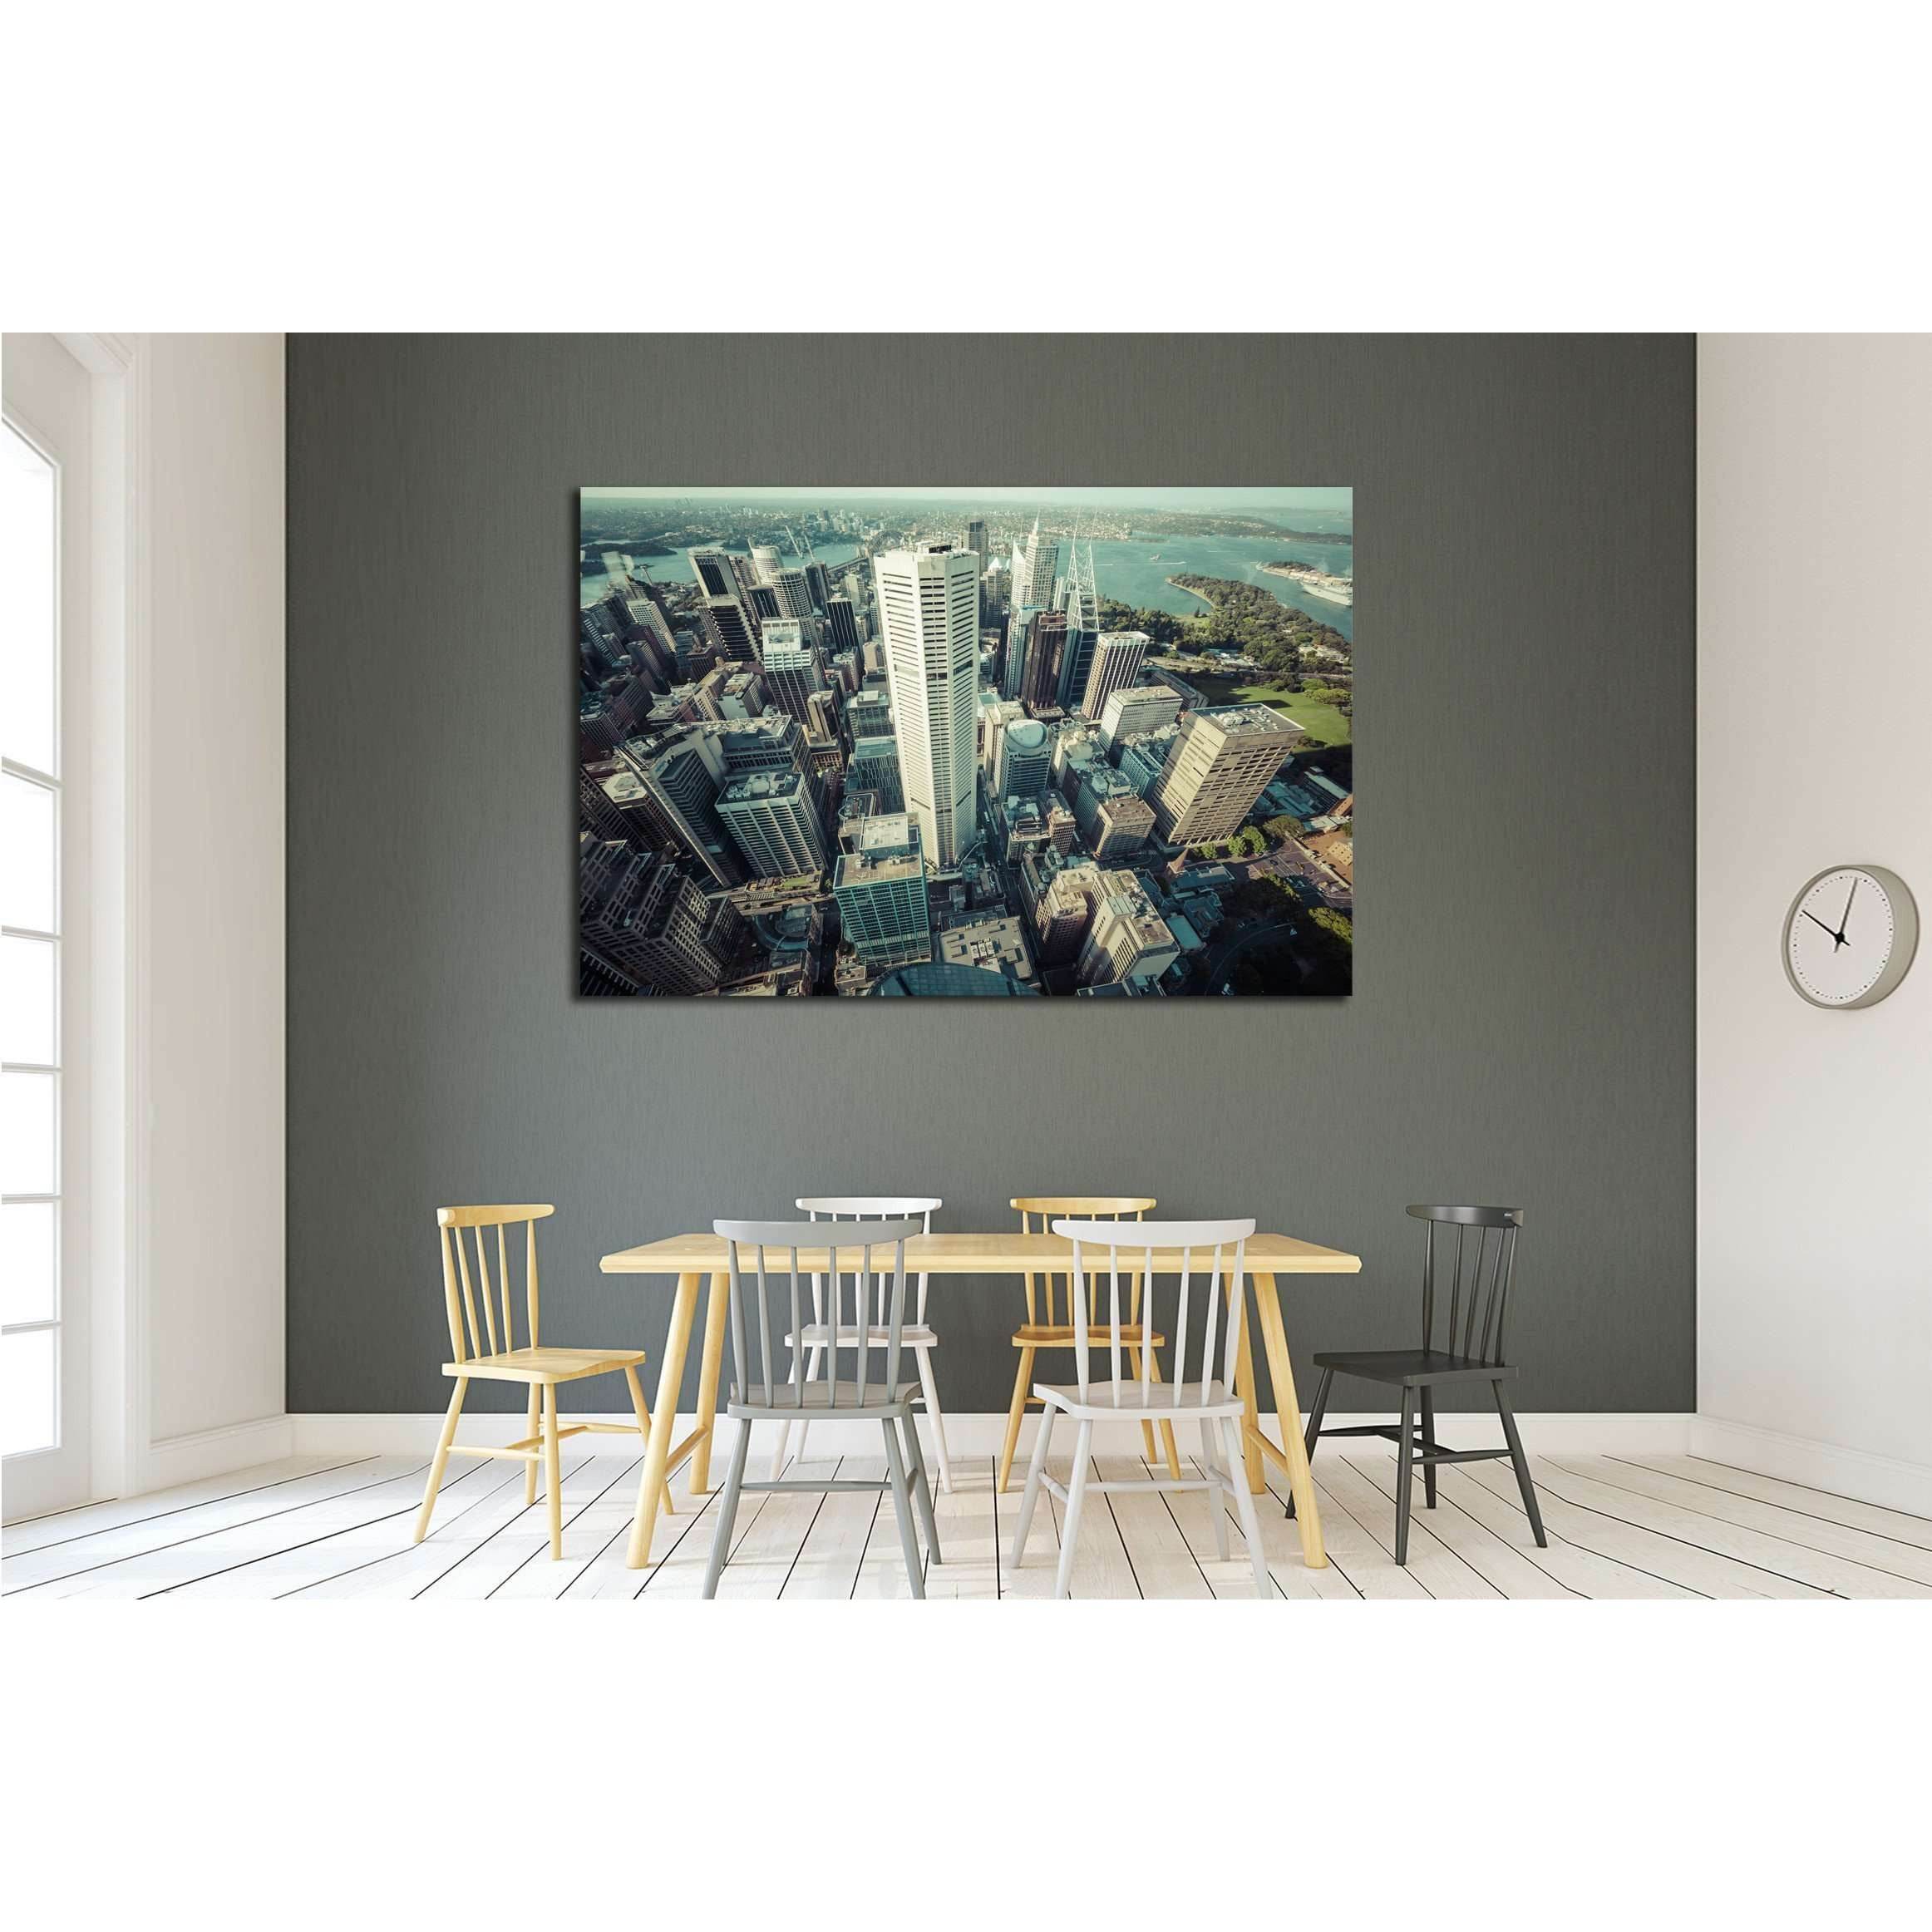 AUSTRALIA, Skyline of Sydney with city central business district №2185 Ready to Hang Canvas Print